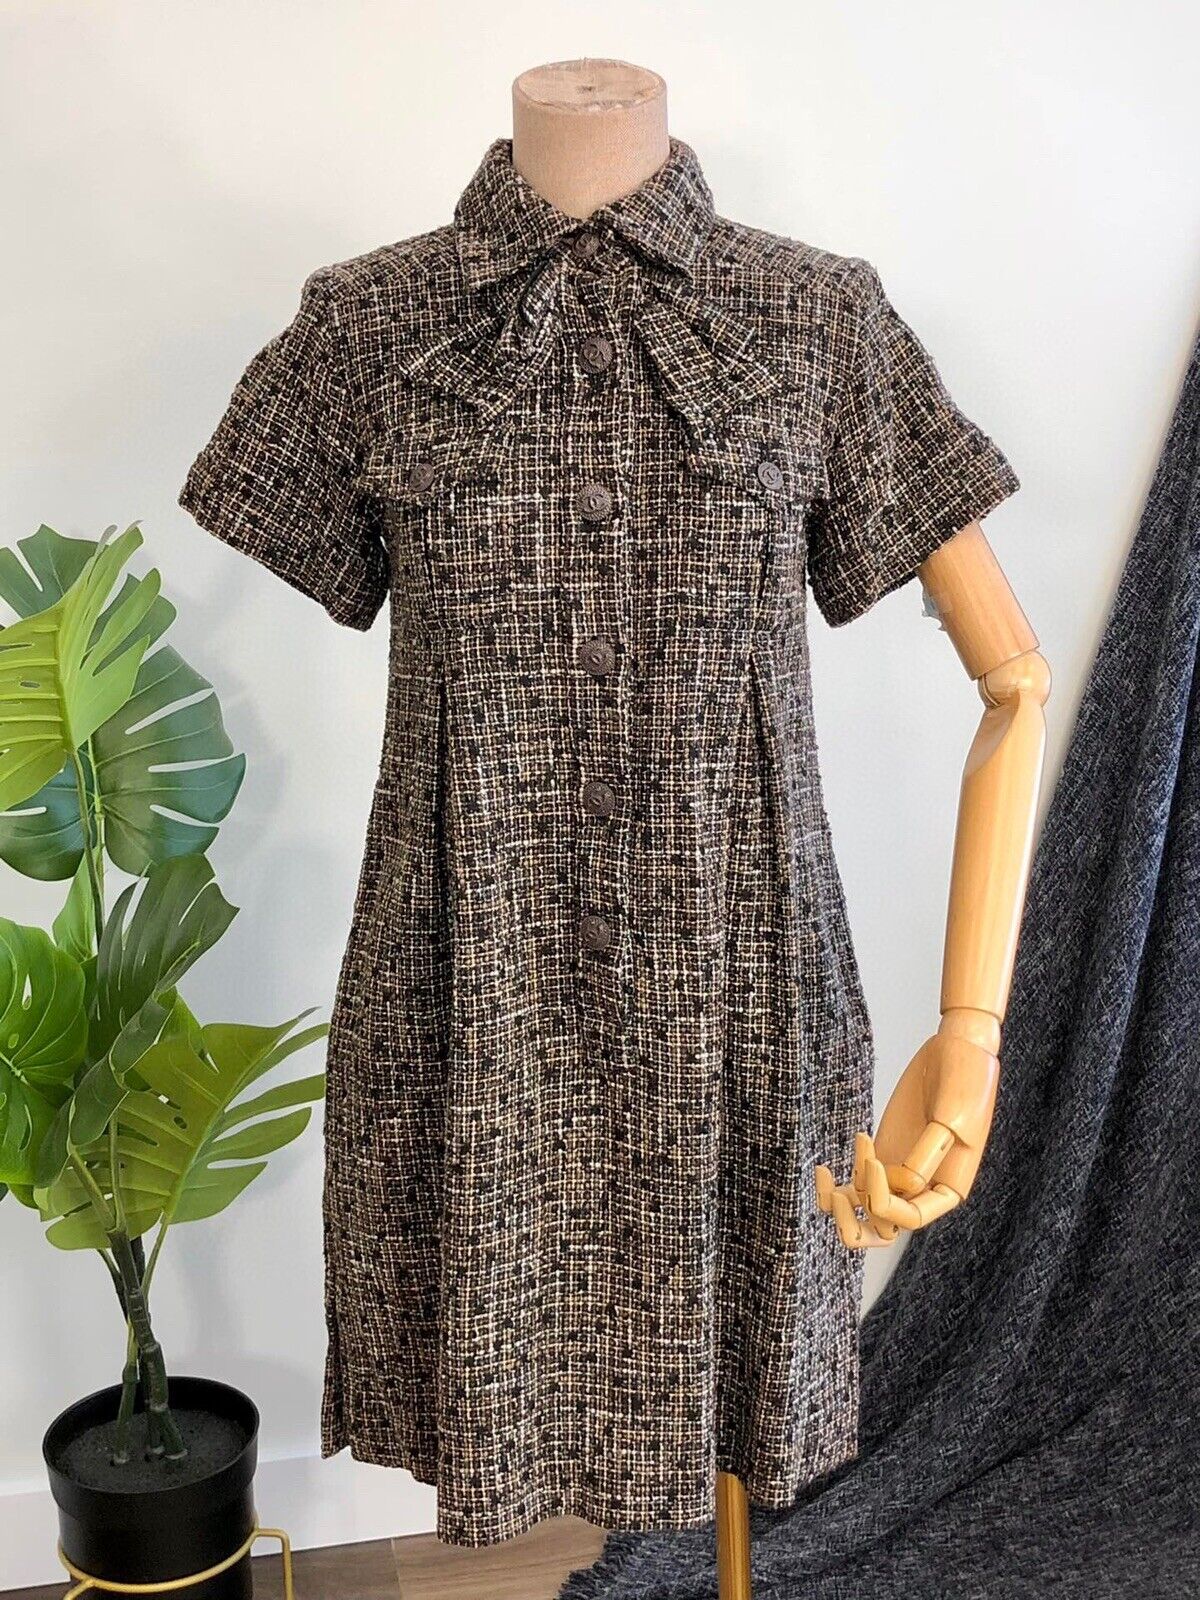 AUTH CHANEL COTTON SILK SHORT SLEEVE TWEED DRESS BOW TIE MINT Size 34